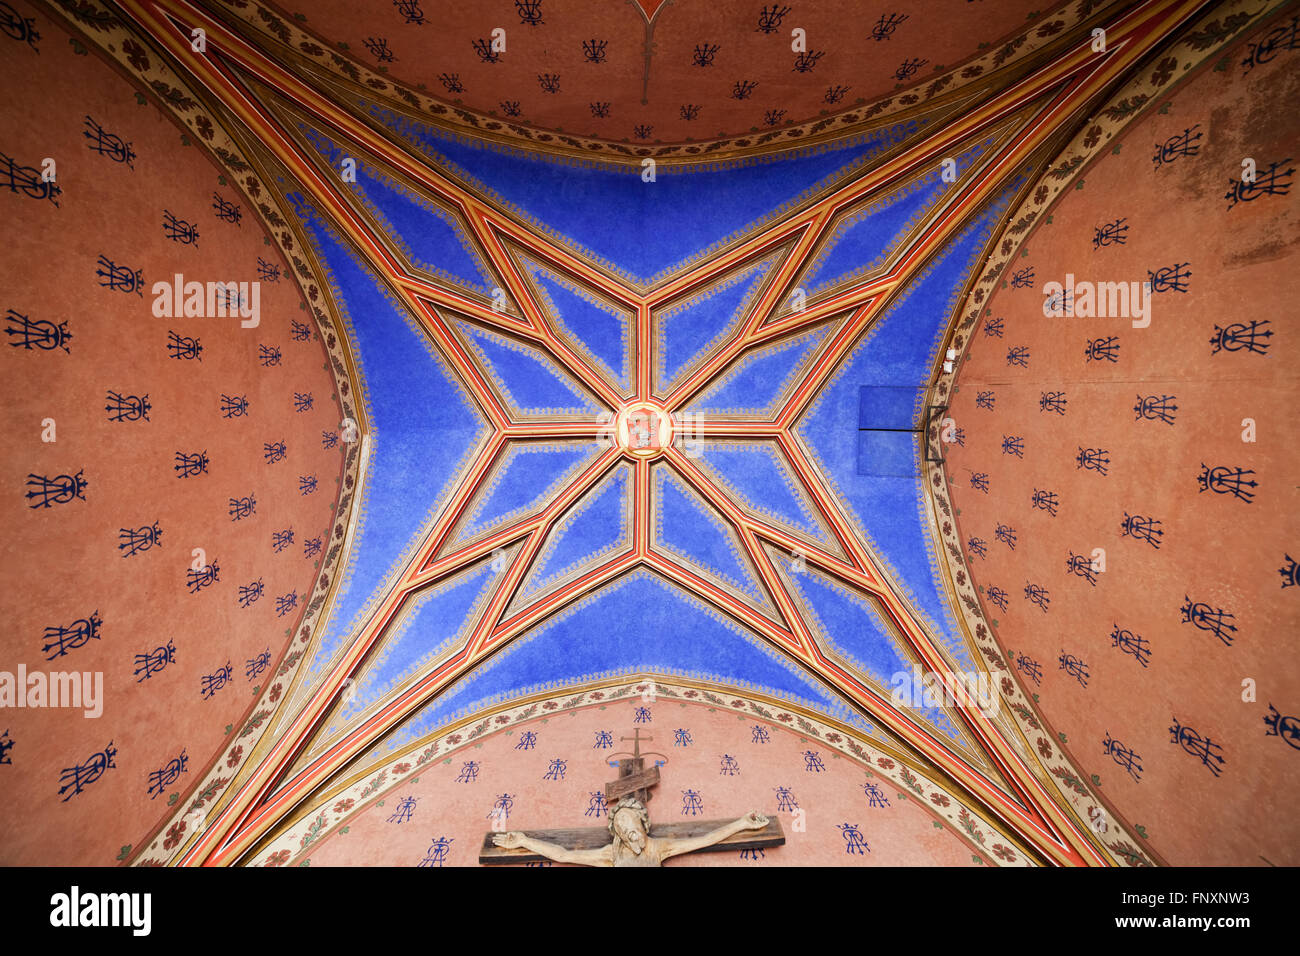 Poland, Krakow, St Florian Gate interior, chapel ceiling, vault, 19th century Gothic Revival style, Historical Museum of the Cit Stock Photo